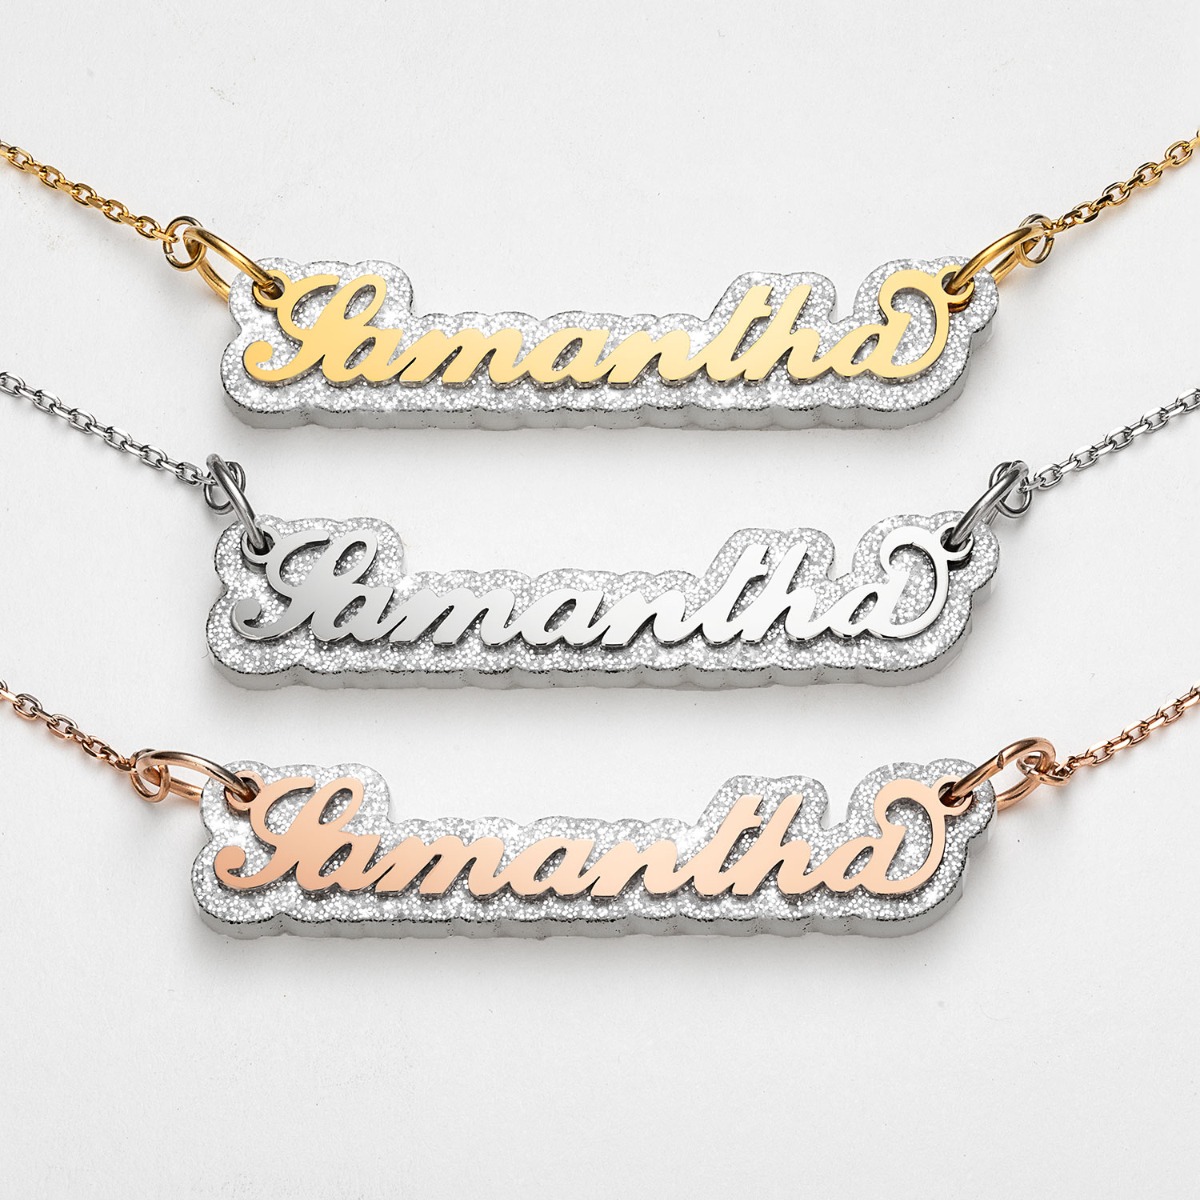 Stainless Steel Name on Silver Glittery Plaque Necklace